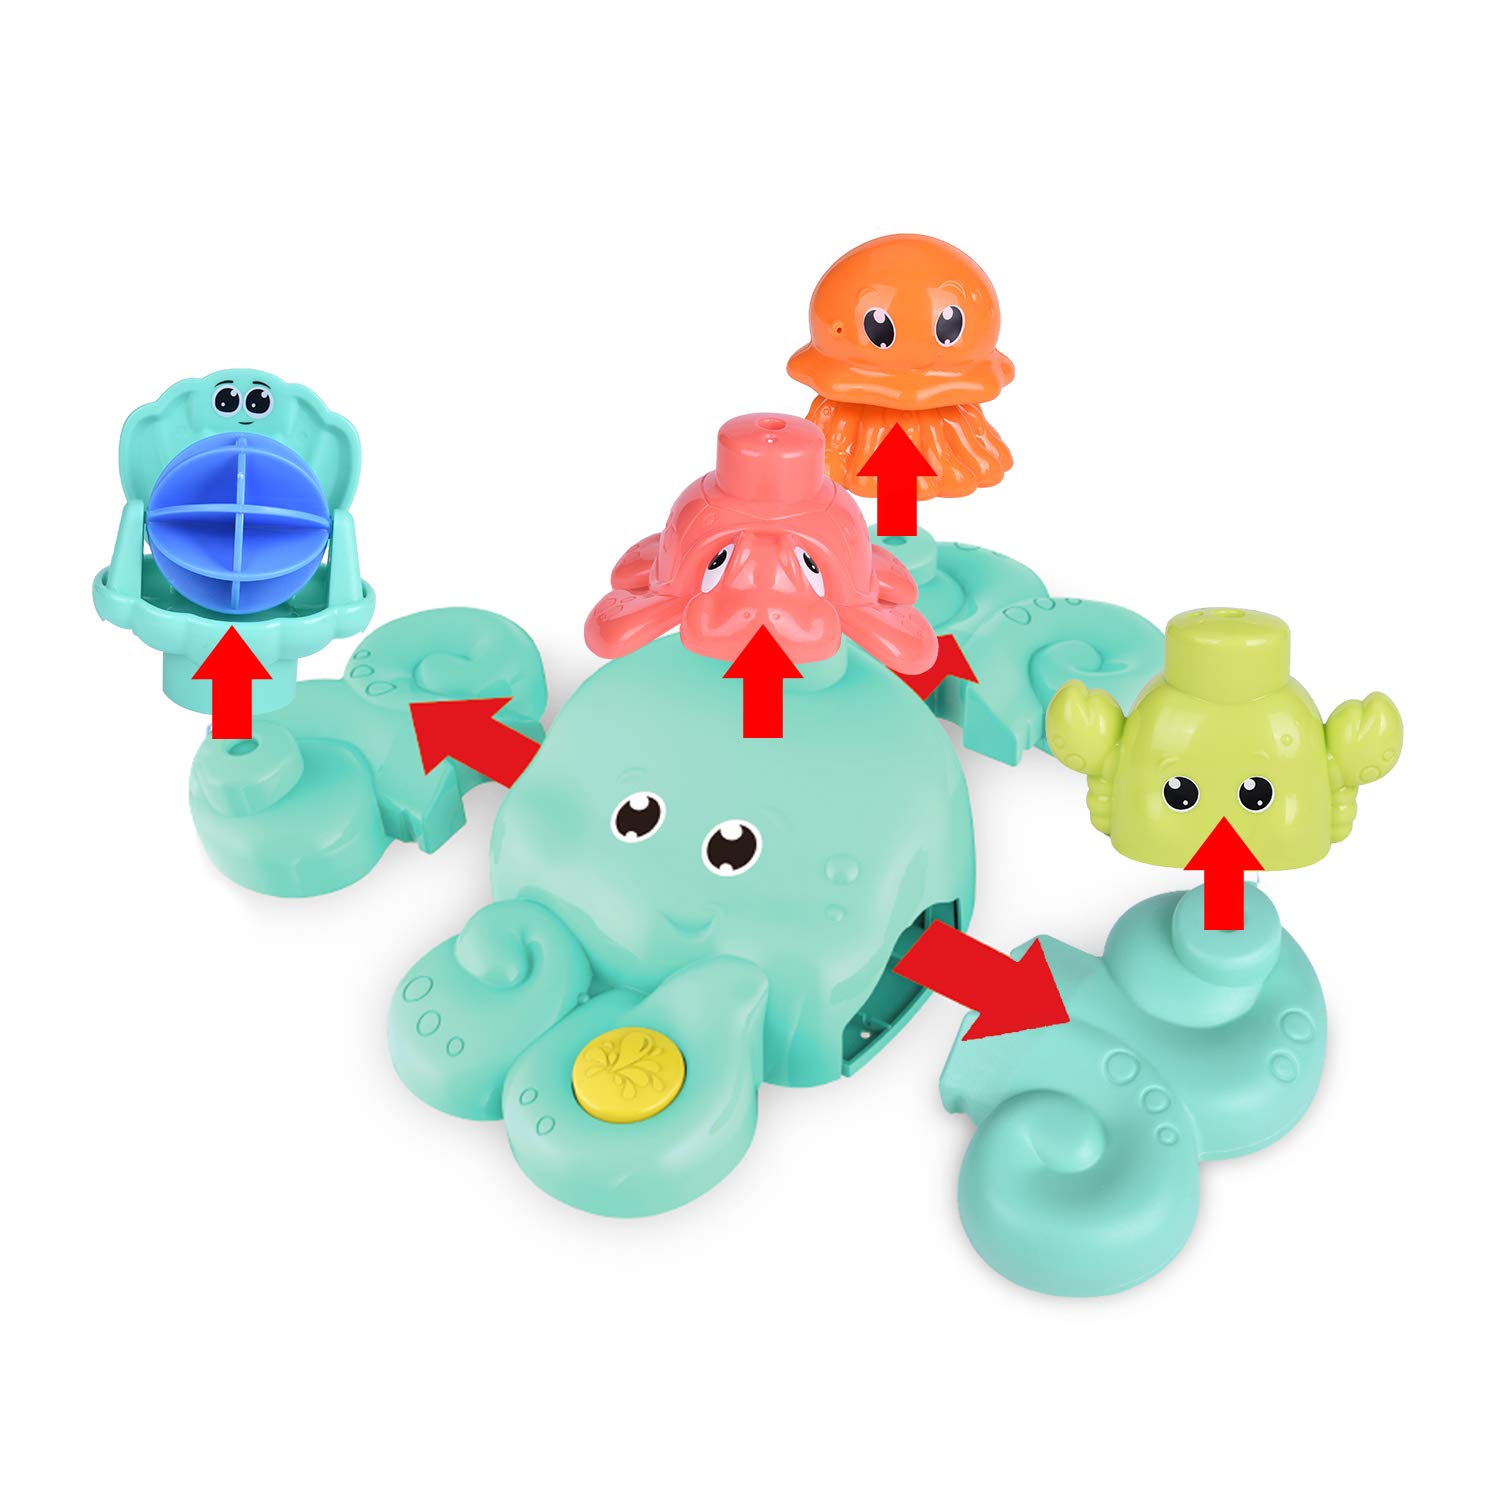 FUN LITTLE TOYS Bath Toys for Toddlers, 5 PCs Bath Tub Toys Set, Spray Water Toys for Kids, Best Gifts for Boys & Girls